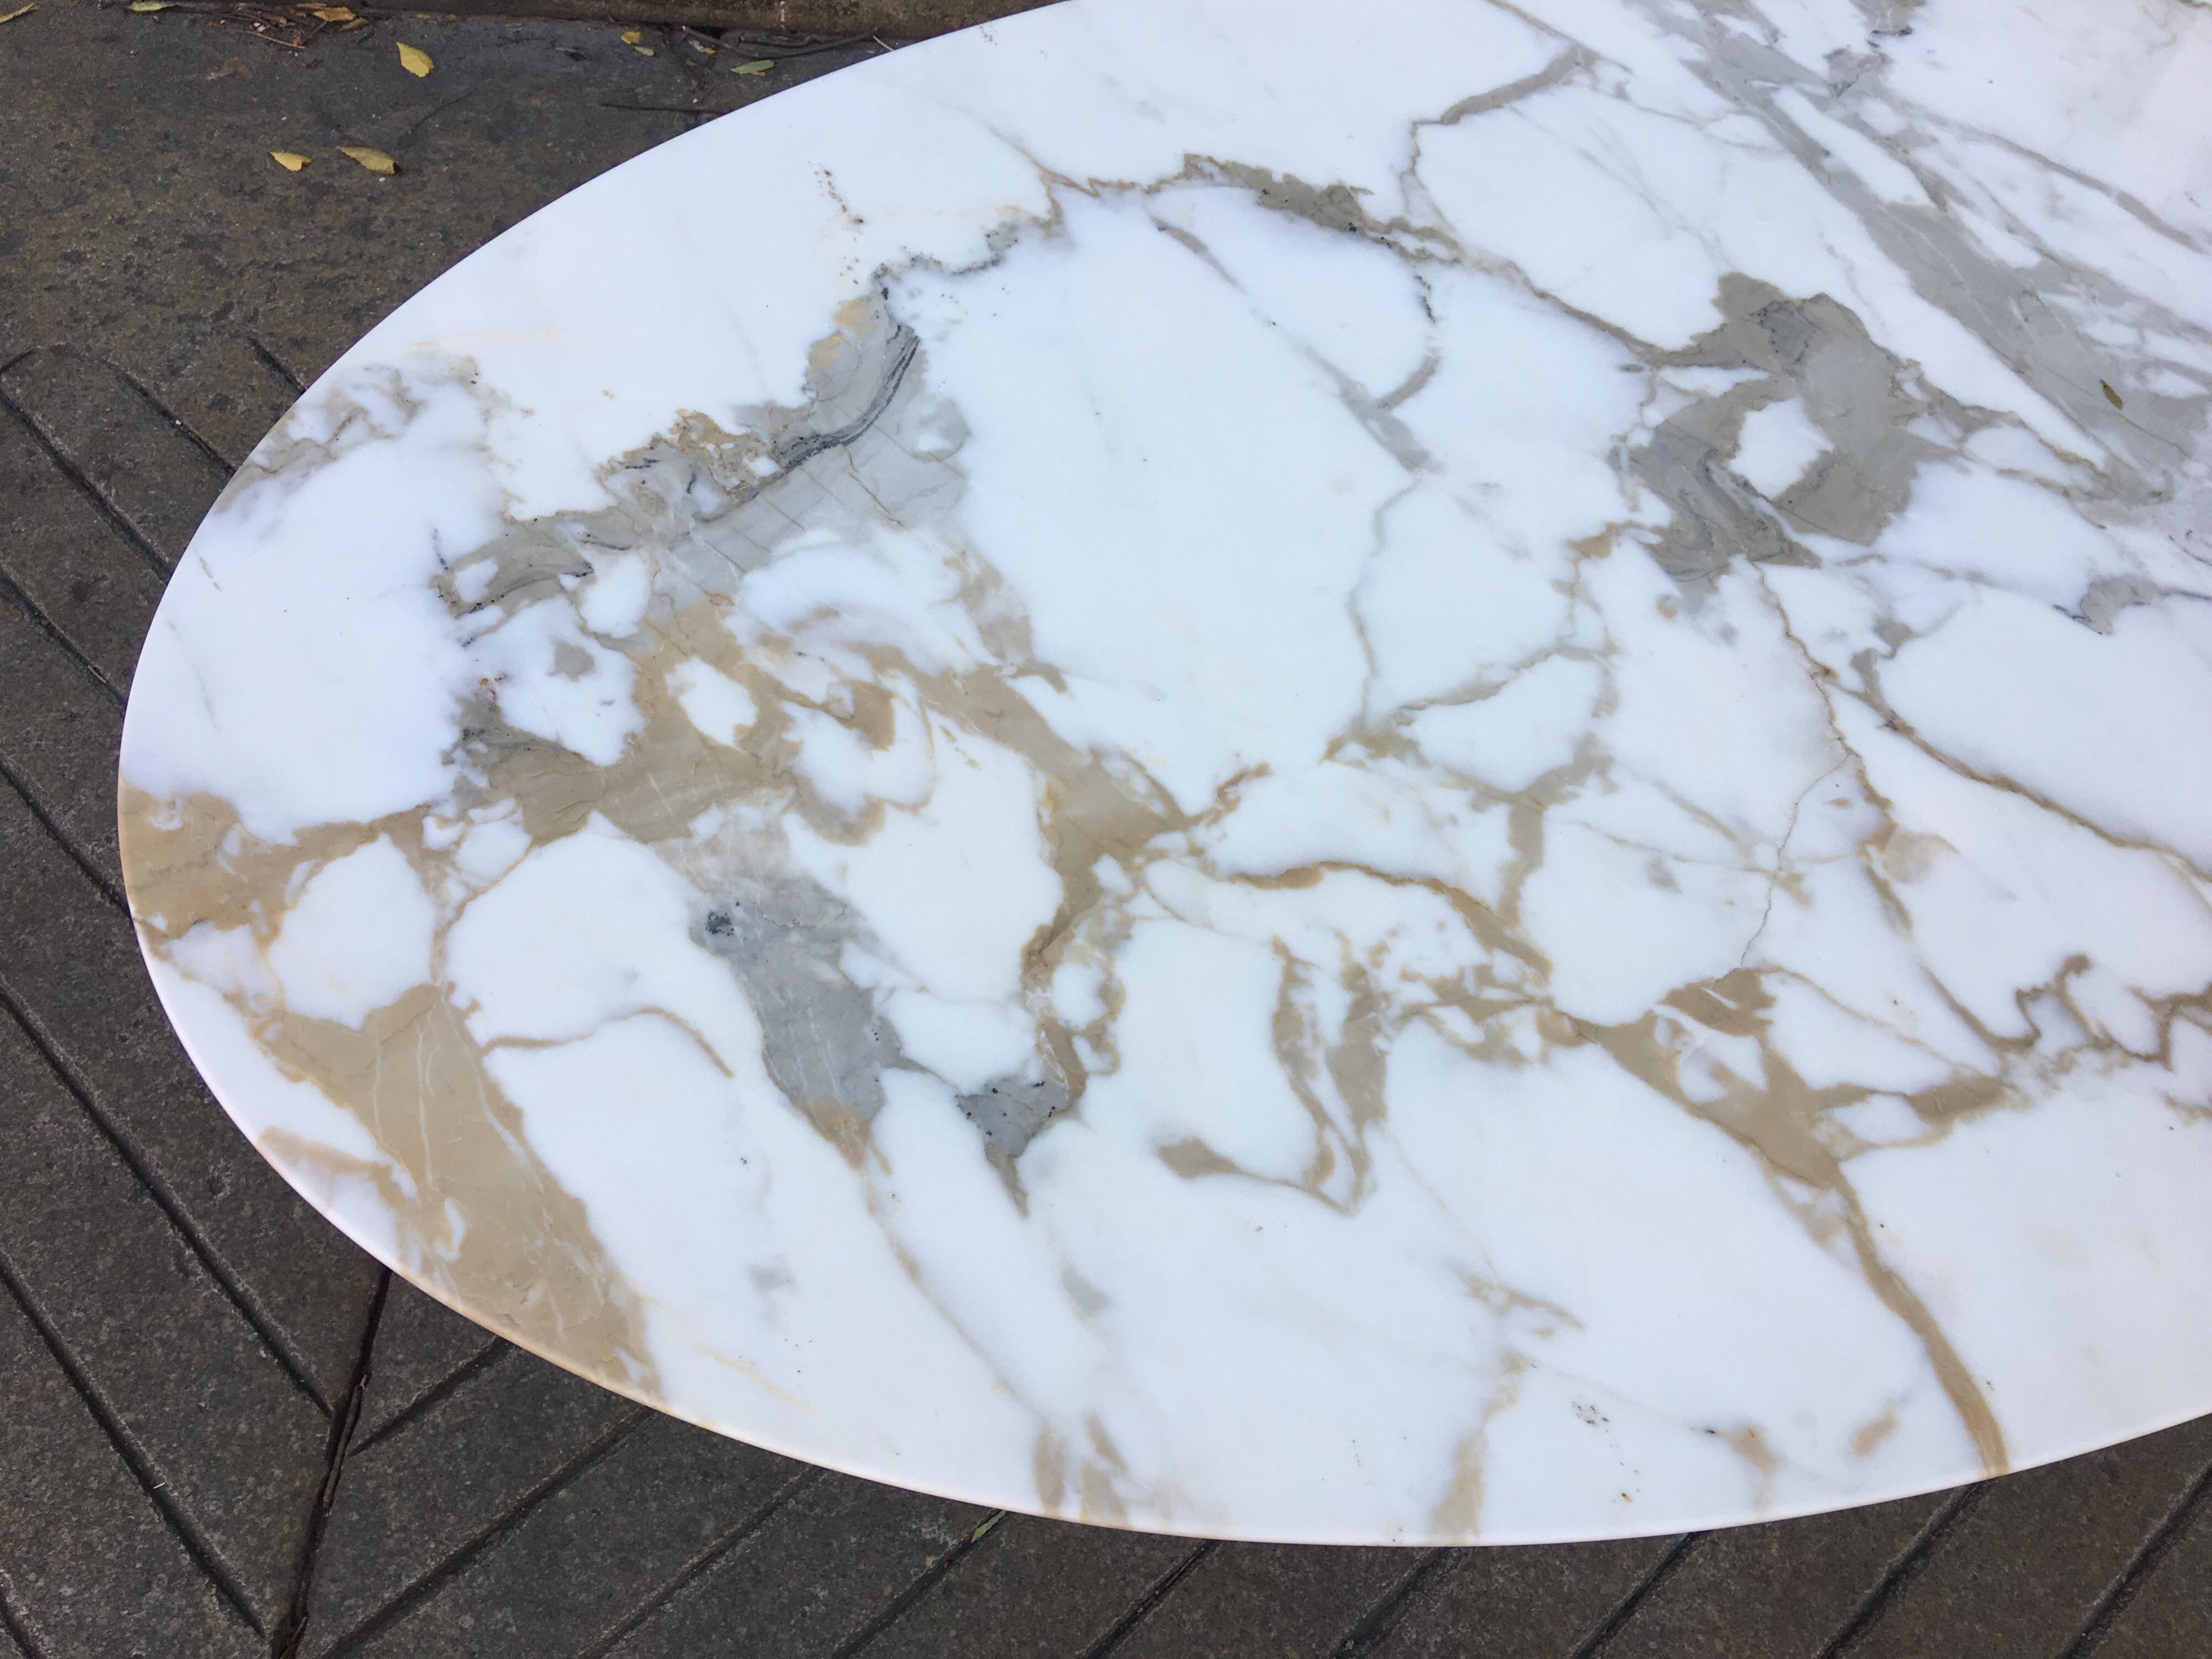 Eero Saarinen for Knoll marble coffee table with older cast iron base. Bought from original owner. Beautiful grained white marble with hints of light brown evenly mottled.